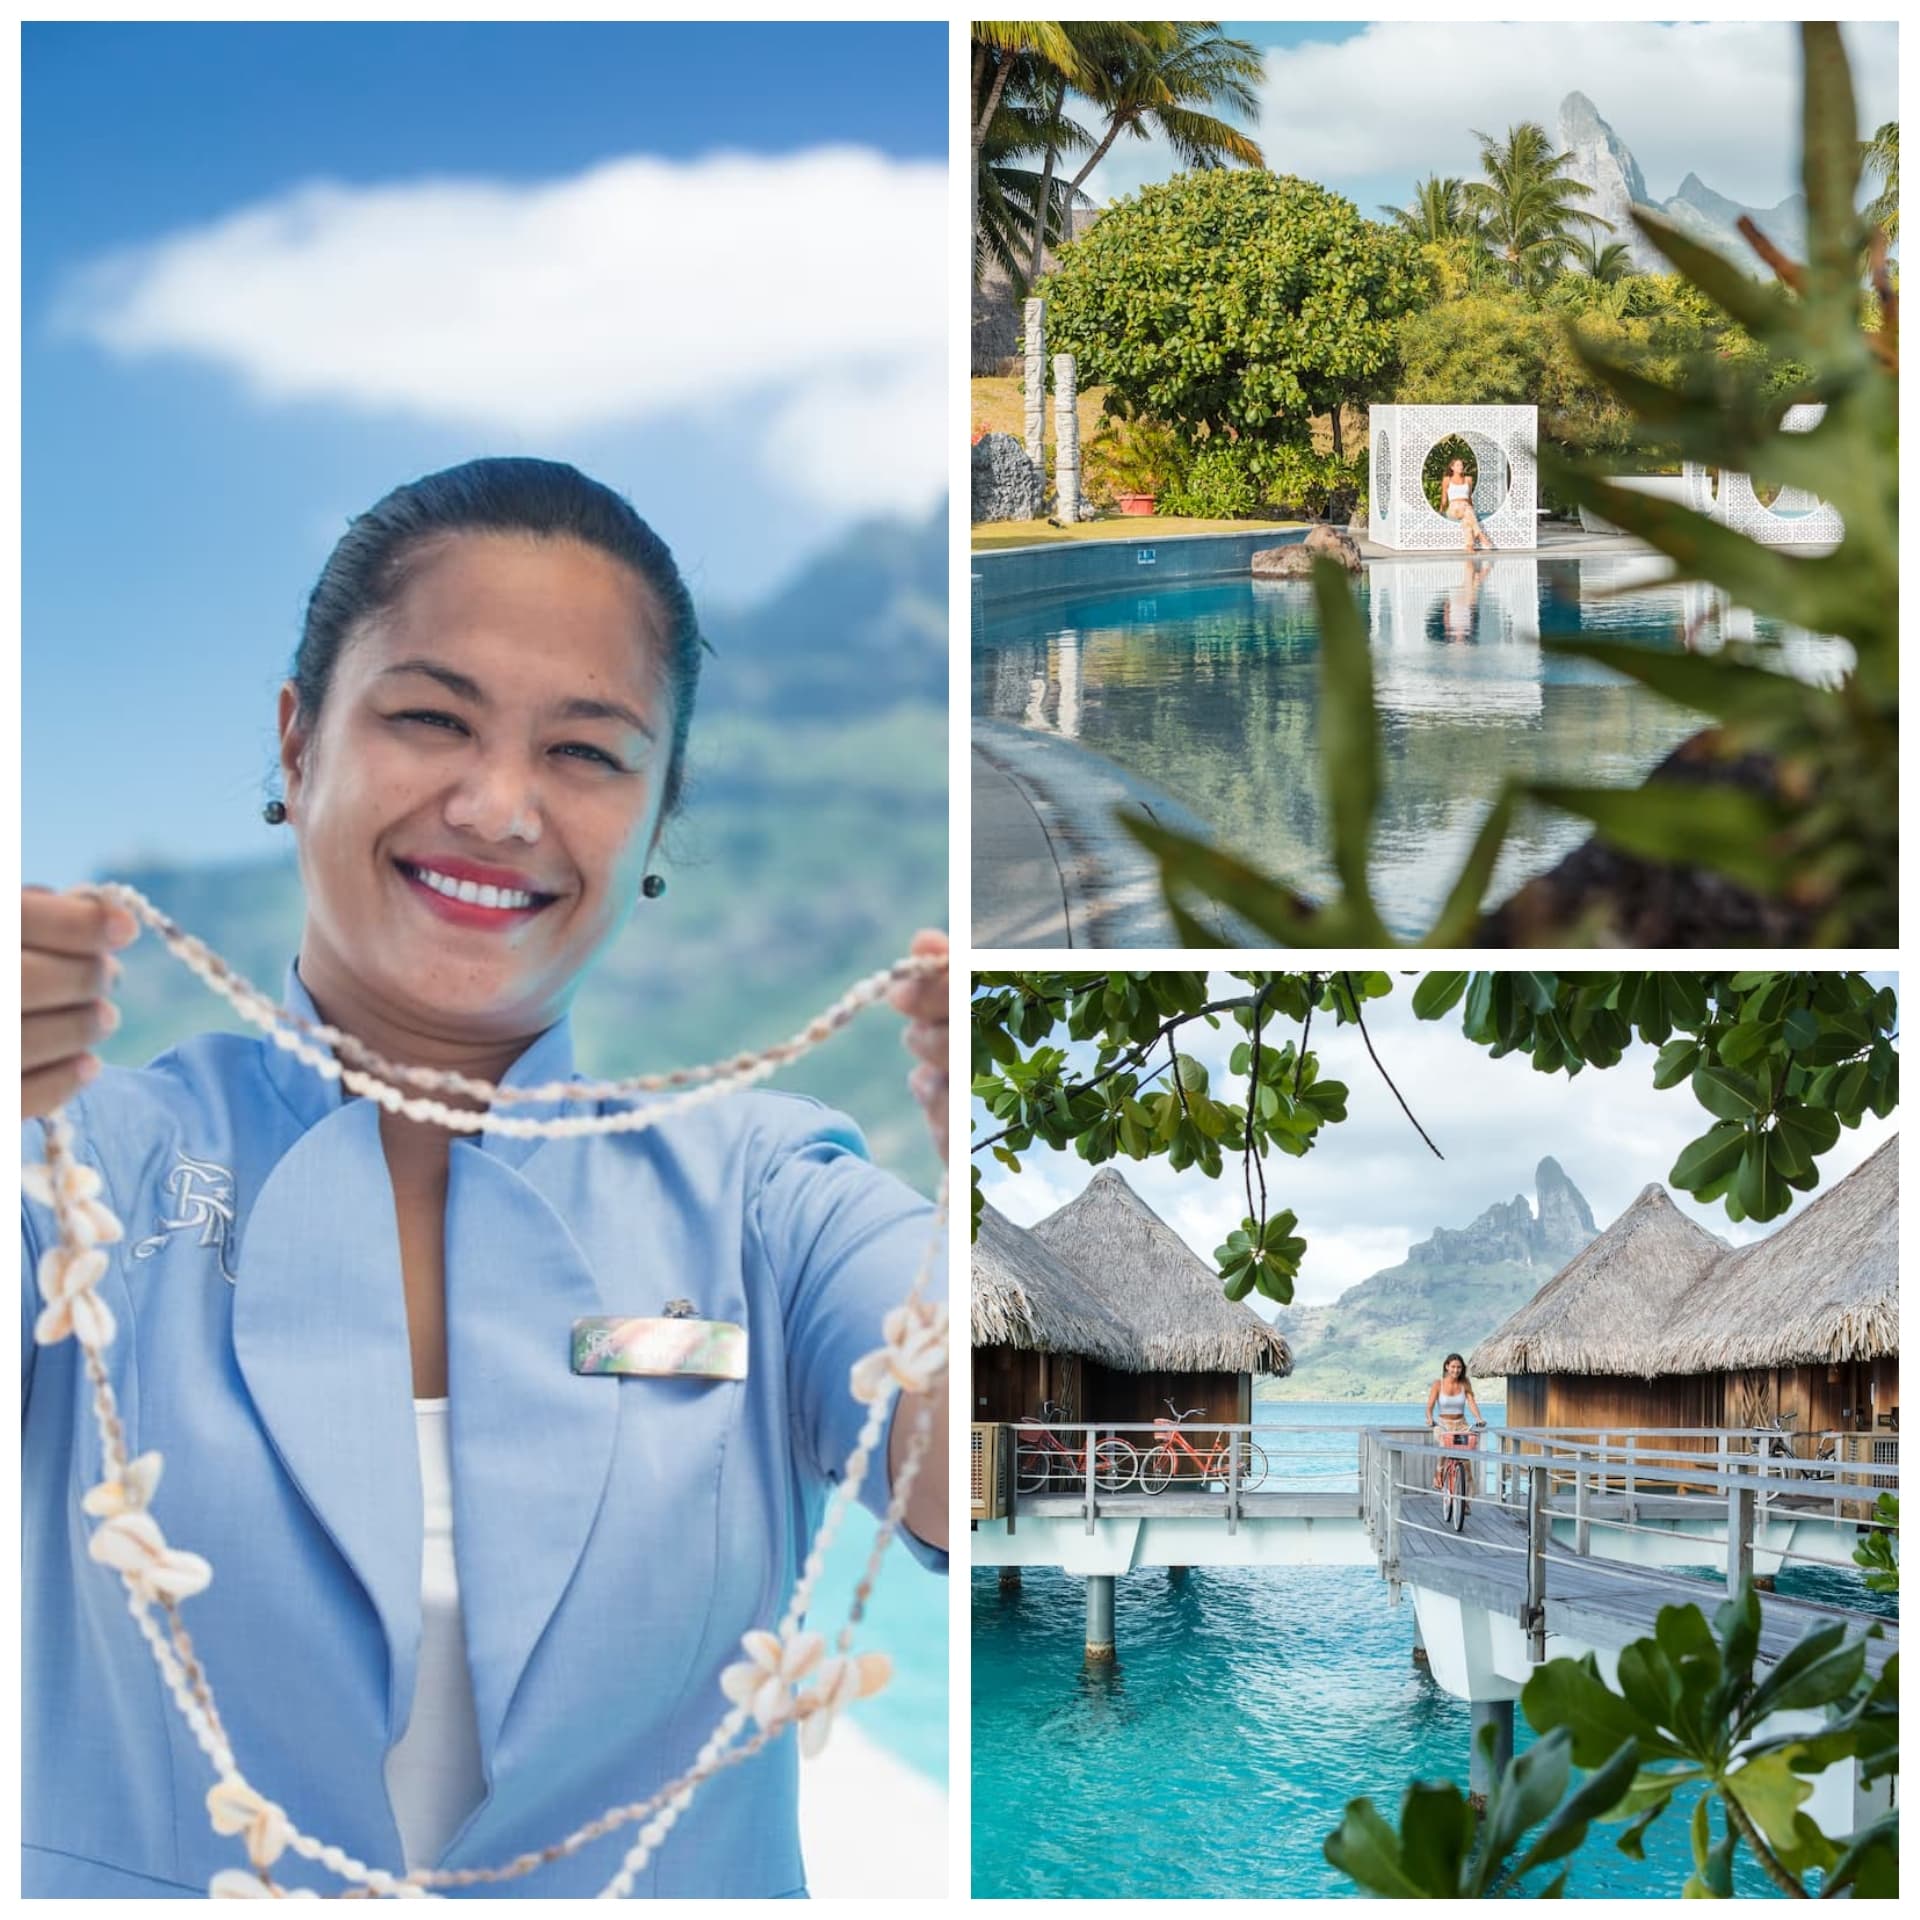 Collage of The St. Regis Bora Bora Resort with a woman presenting a Tahitian shell lei, a woman sitting in a cabana over a lagoon, and a woman riding a bicycle on the wooden walkway next to overwater bungalows.